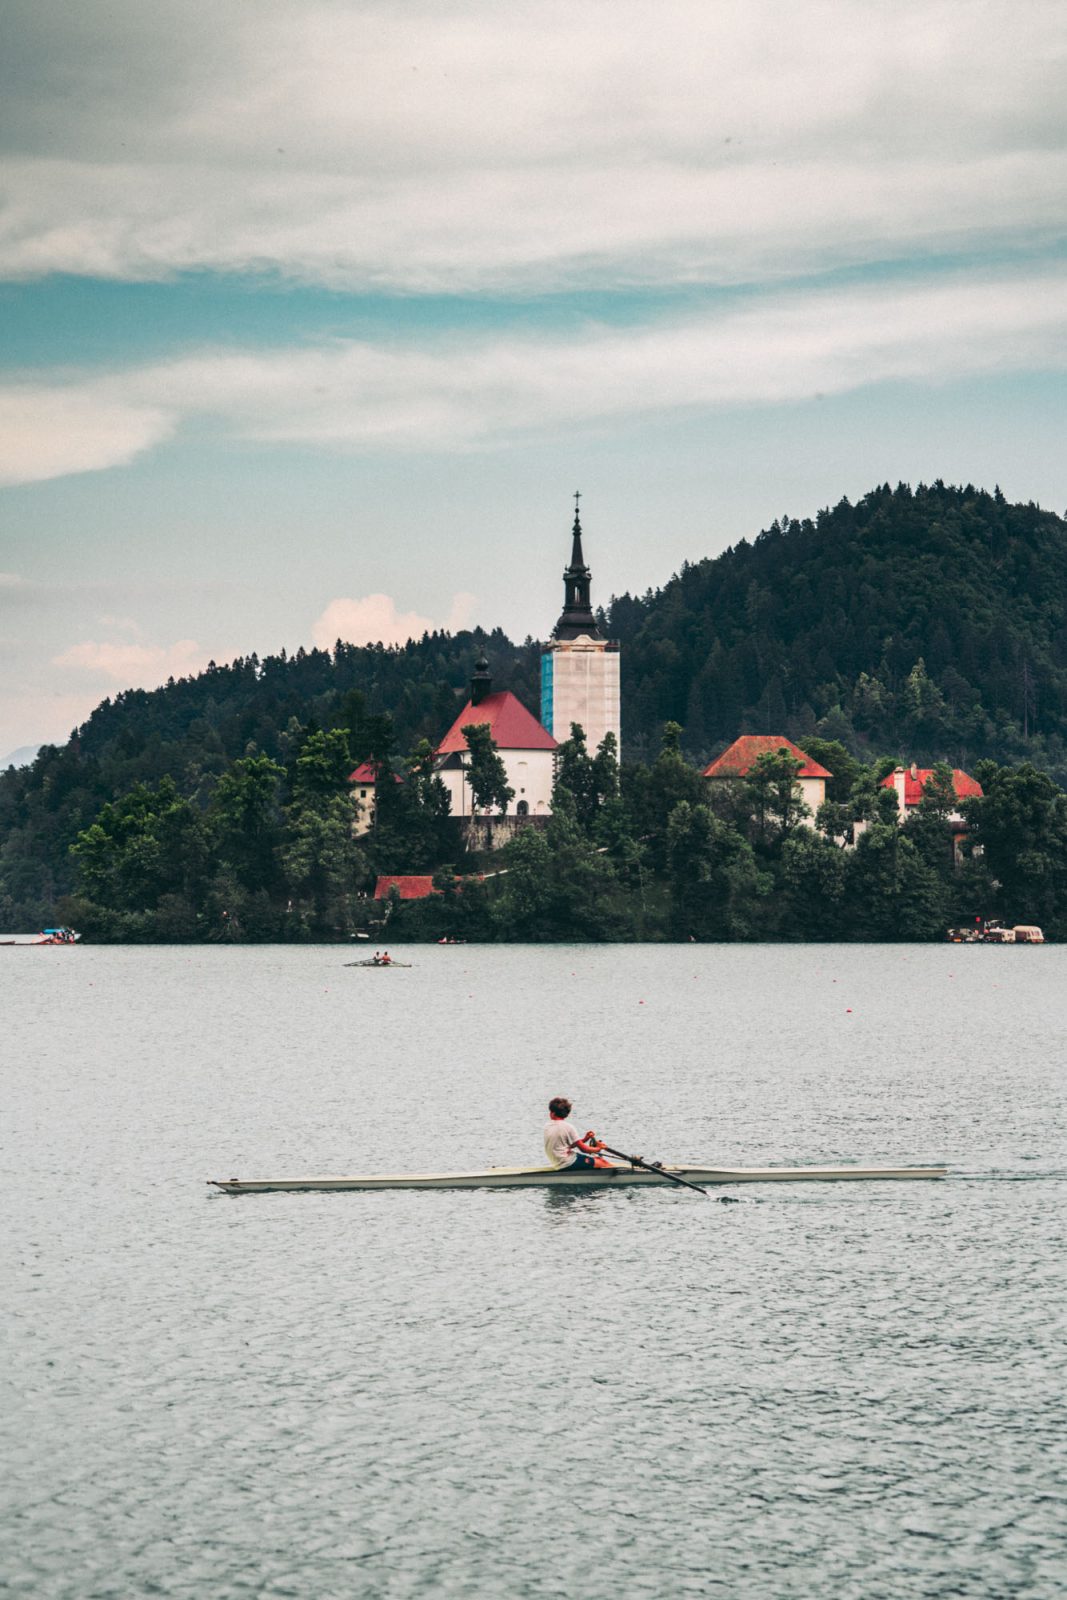 things to do in slovenia on holiday: Lake Bled